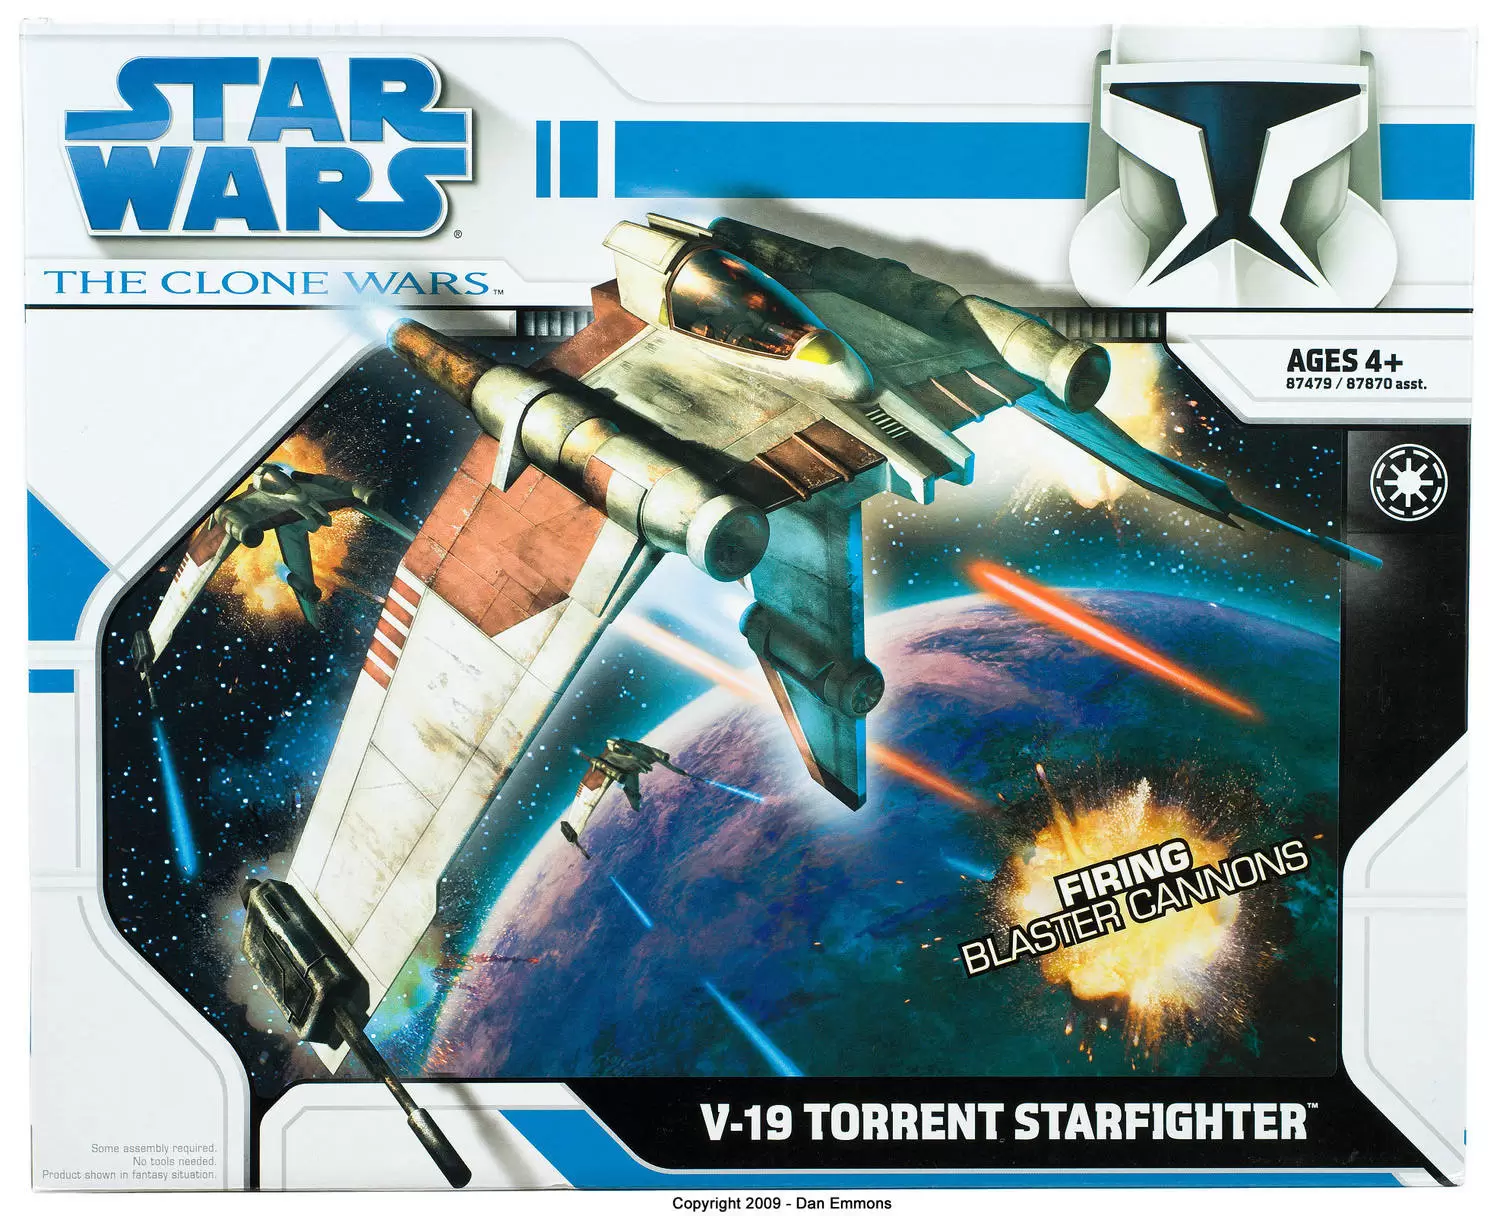 V-19 Torrent Starfighter - The Clone Wars (TCW 2008) action figure